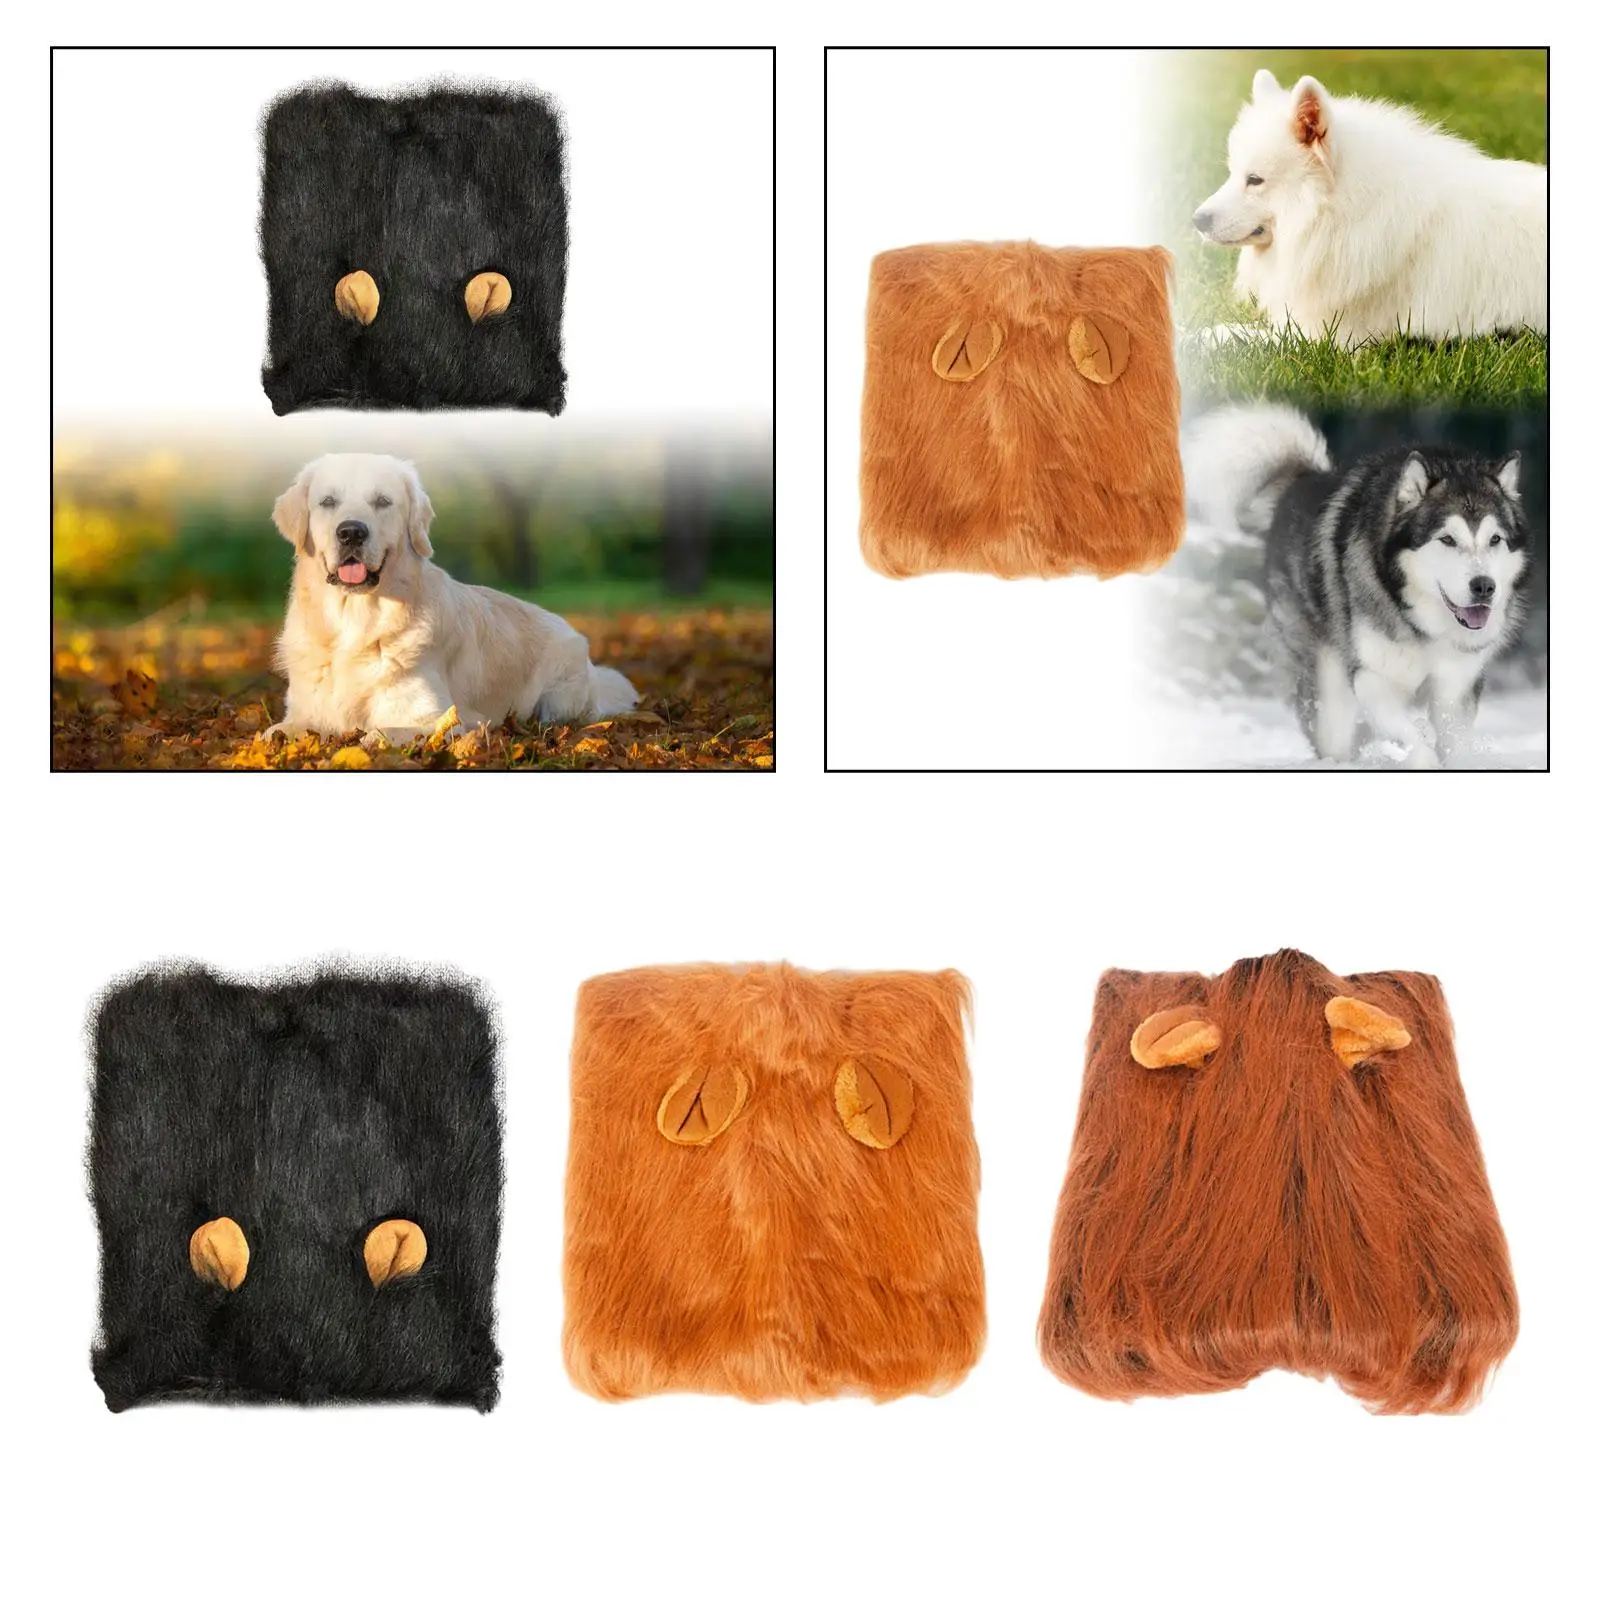 Mane Costume for Cat Funny Cute Pet Clothing Accessories Headwear Outfit for Party Fancy Dress up Large Dogs Halloween Role Play